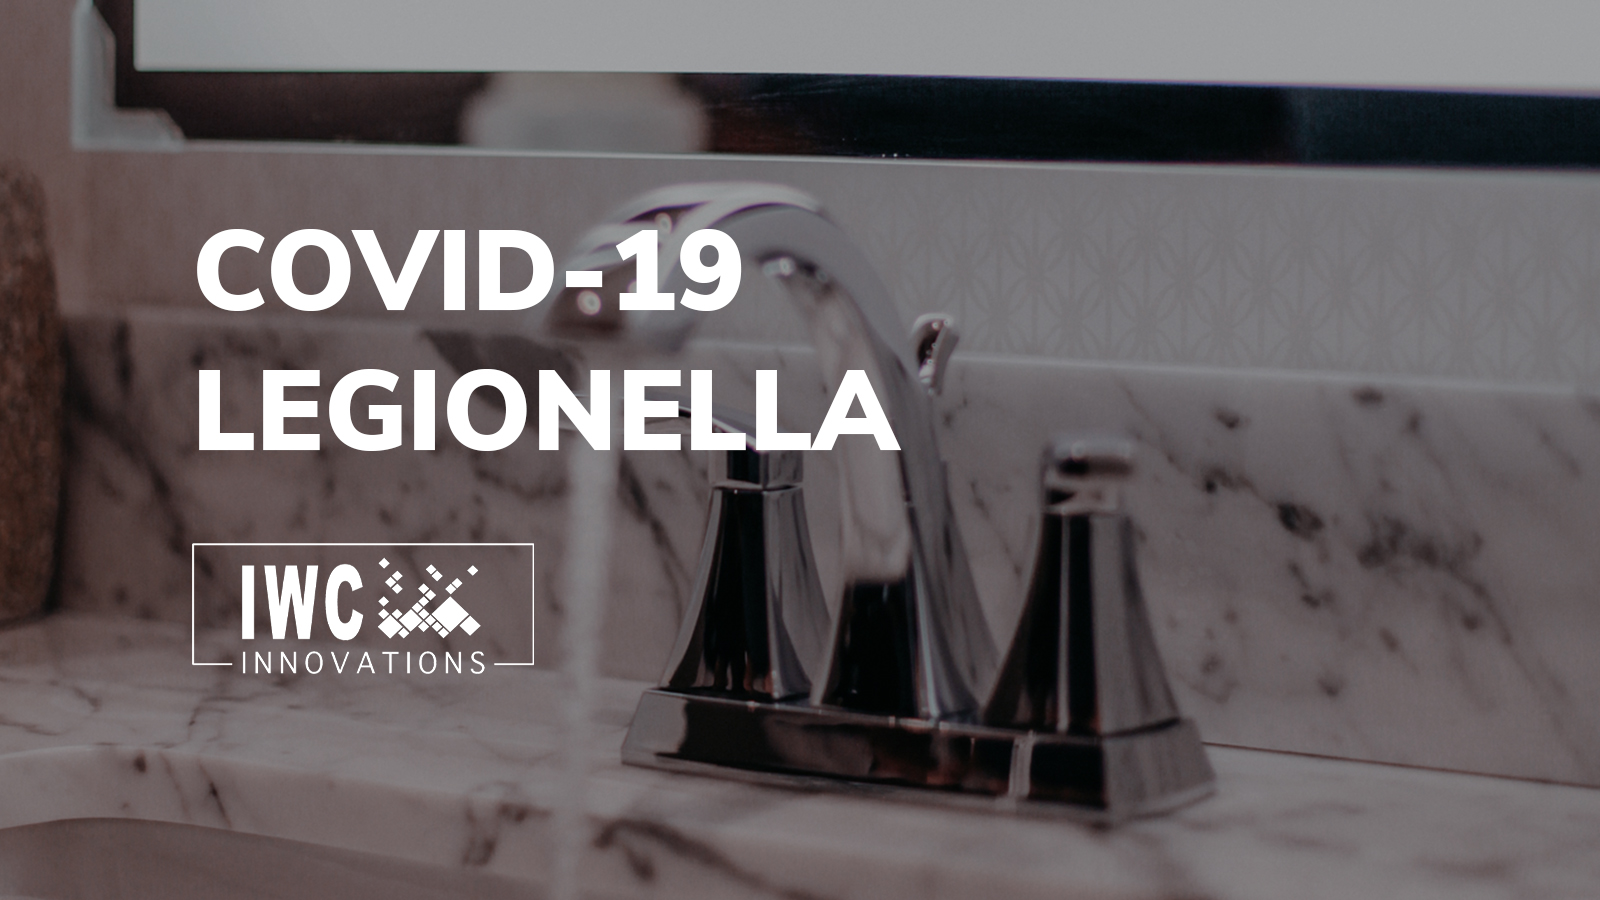 Managing Legionella in Water Systems During the COVID-19 Pandemic